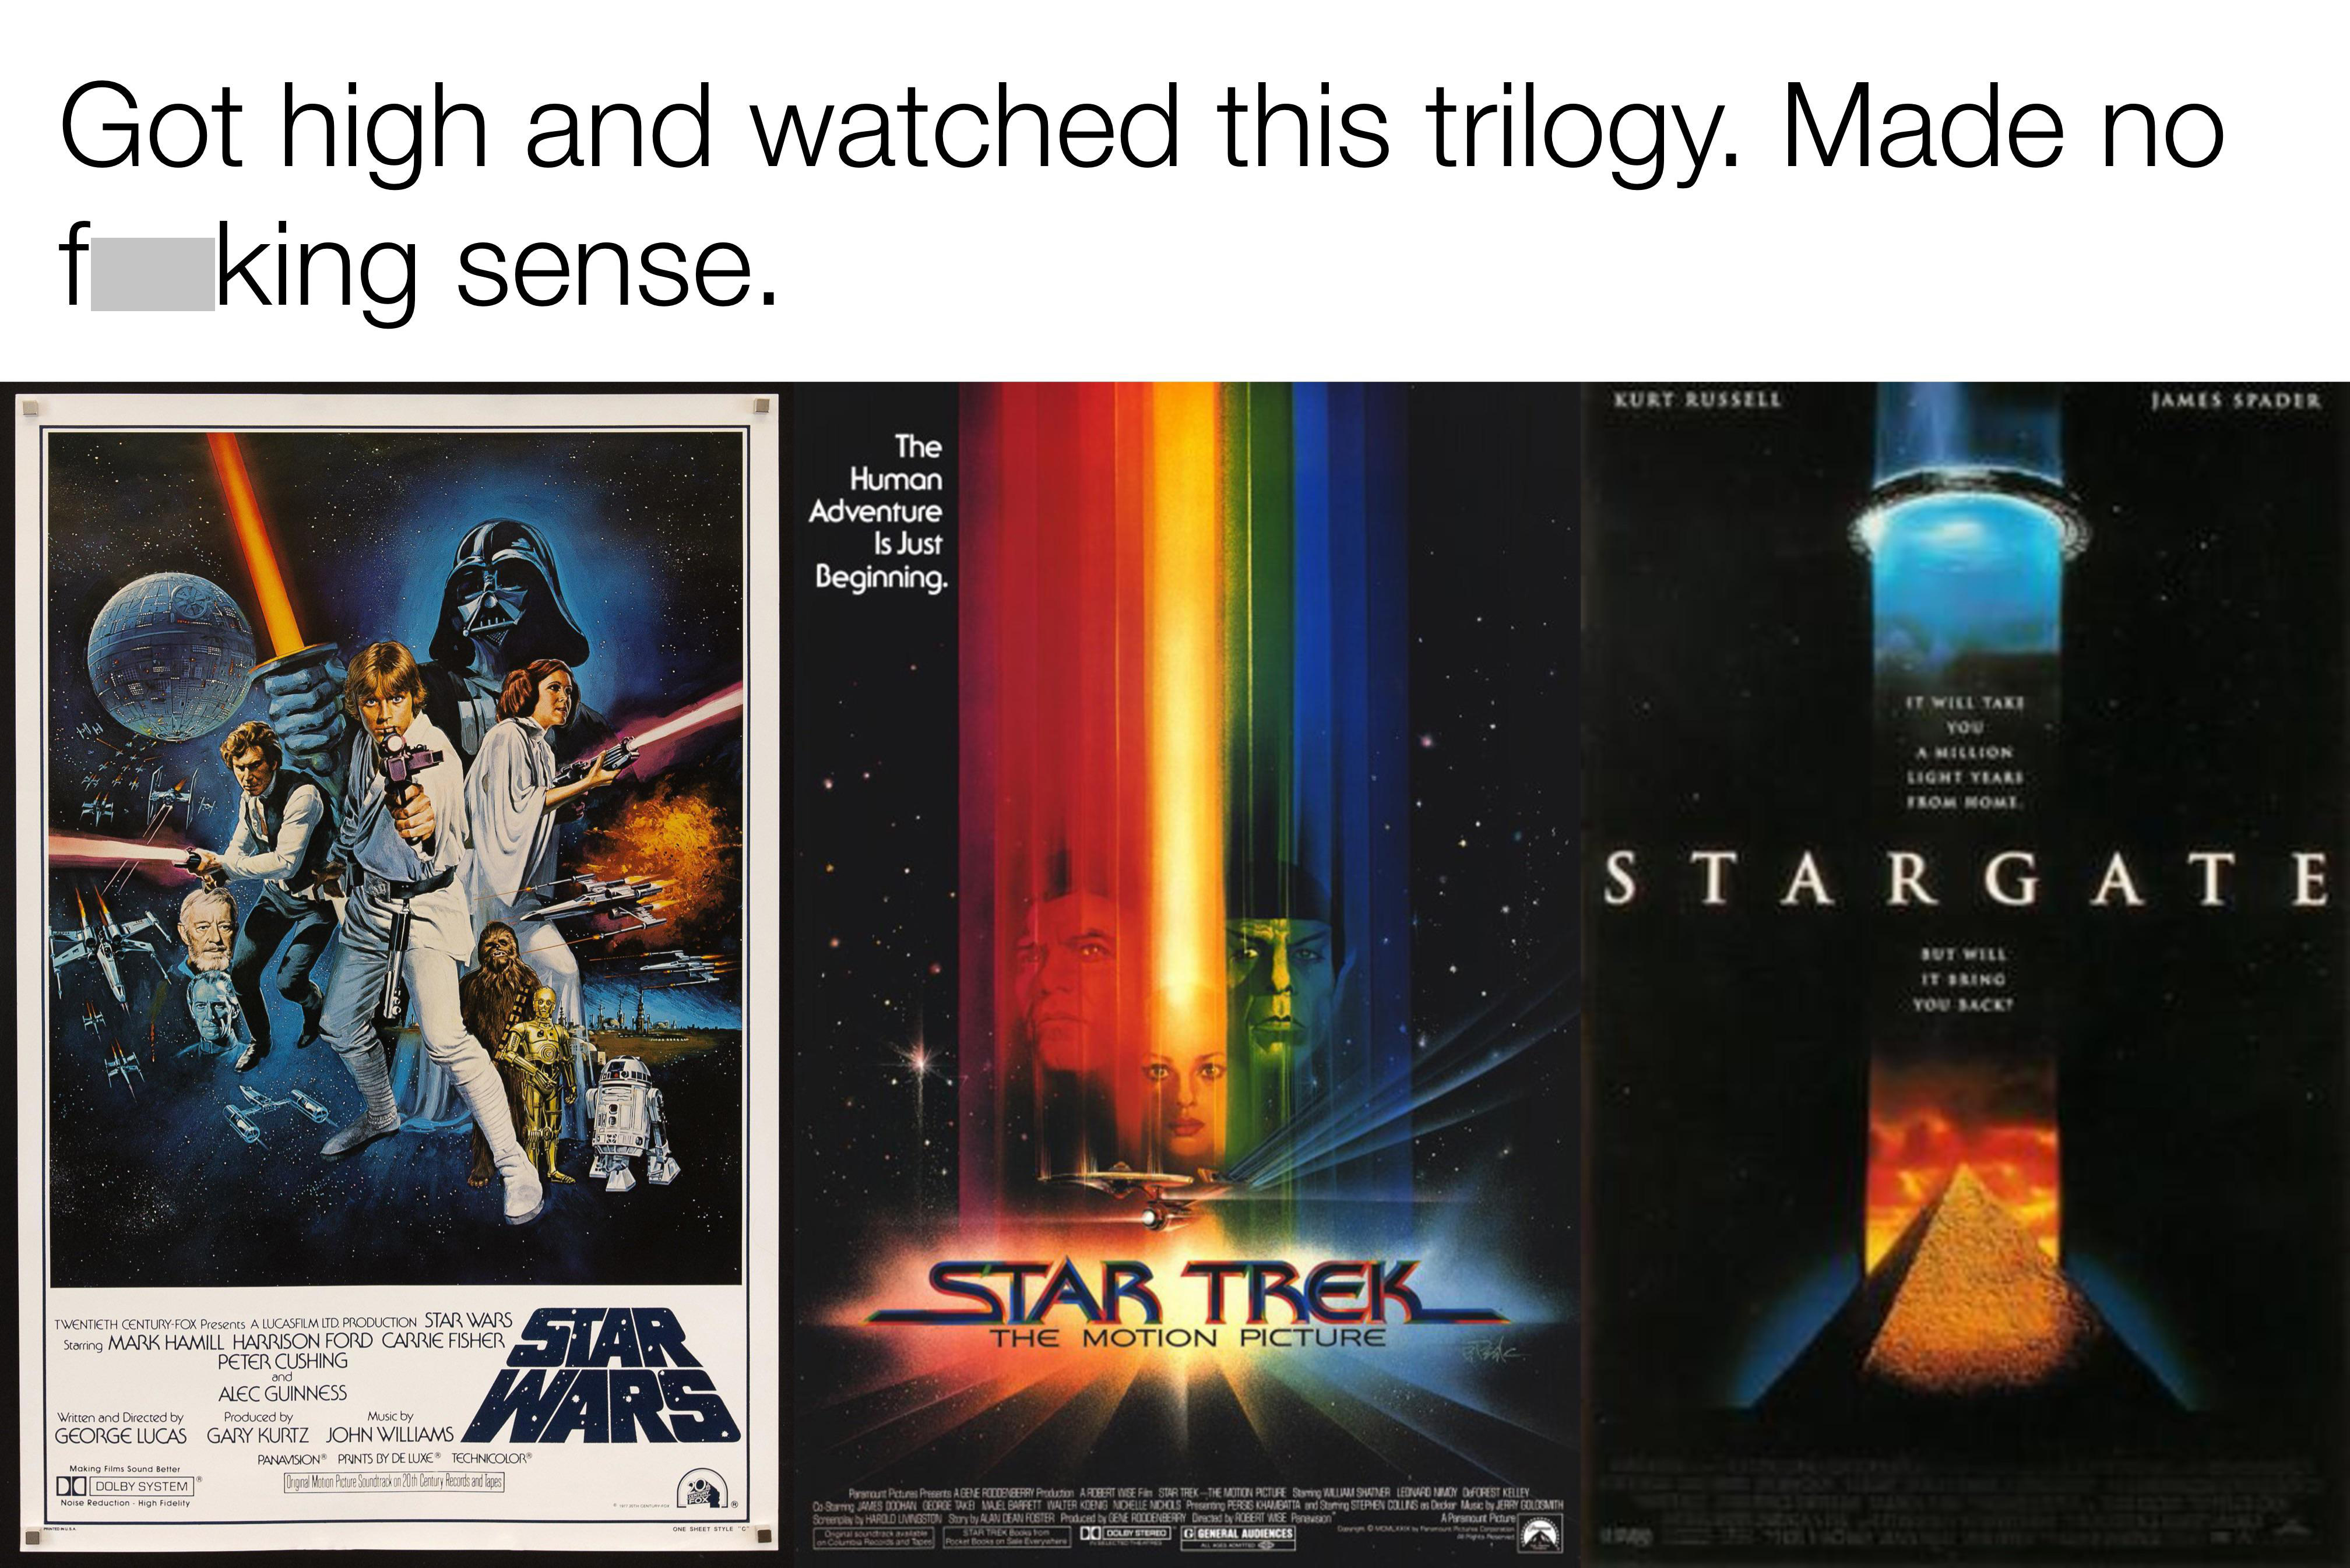 dank memes - funny memes - star wars movie poster - Got high and watched this trilogy. Made no f king sense. Kurtarrel James Brader The Human Adventure Is Just Beginning Es Stargate Be Y Bar Star Trek The Motion Picture Swa Maha Wrochito Caveiki Piercisin